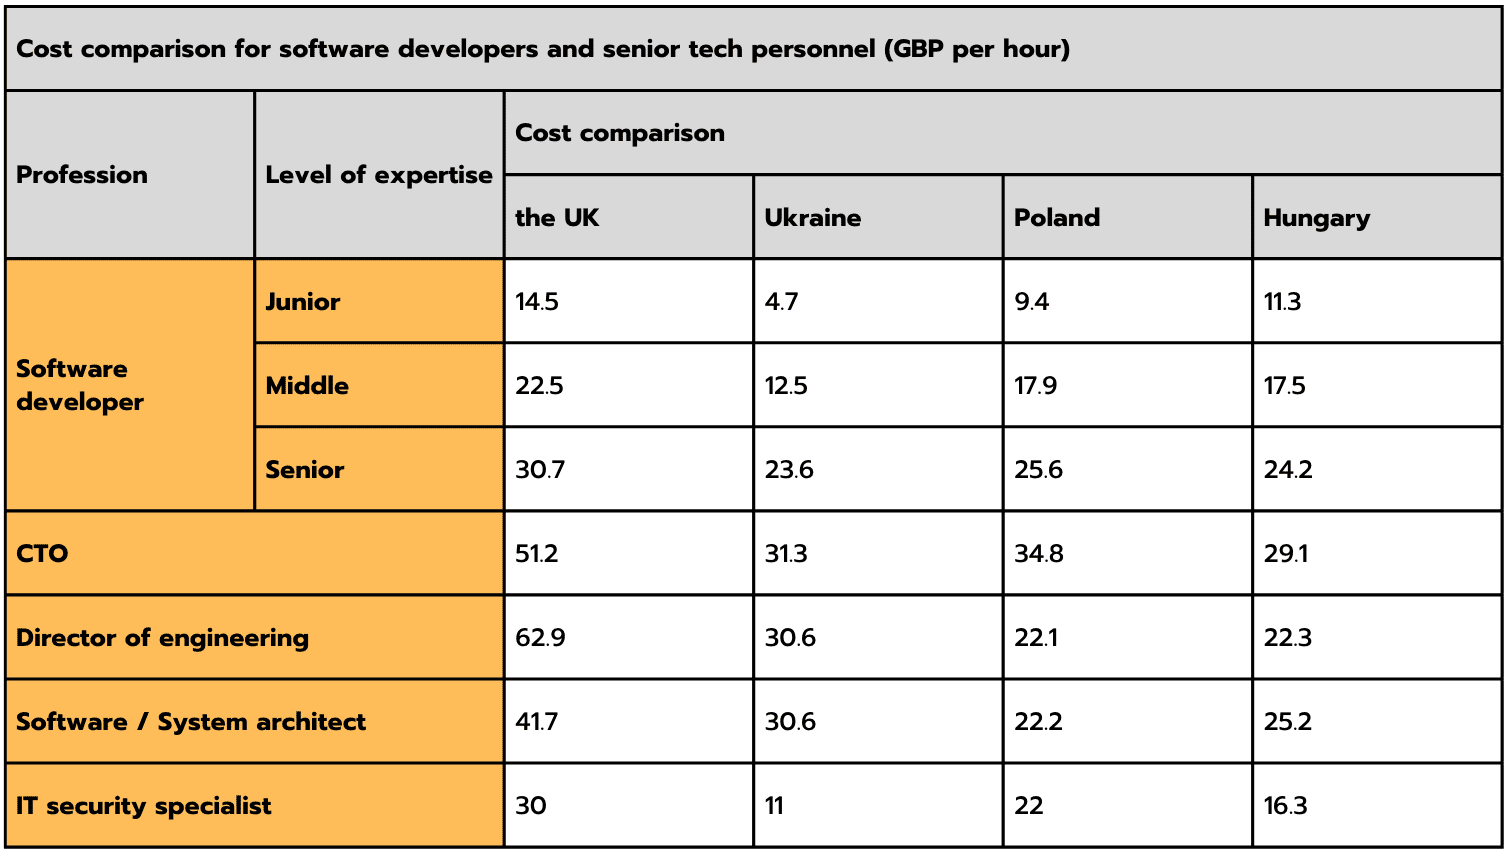 Cost comparison for software developers and senior tech personnel (GBP per hour)